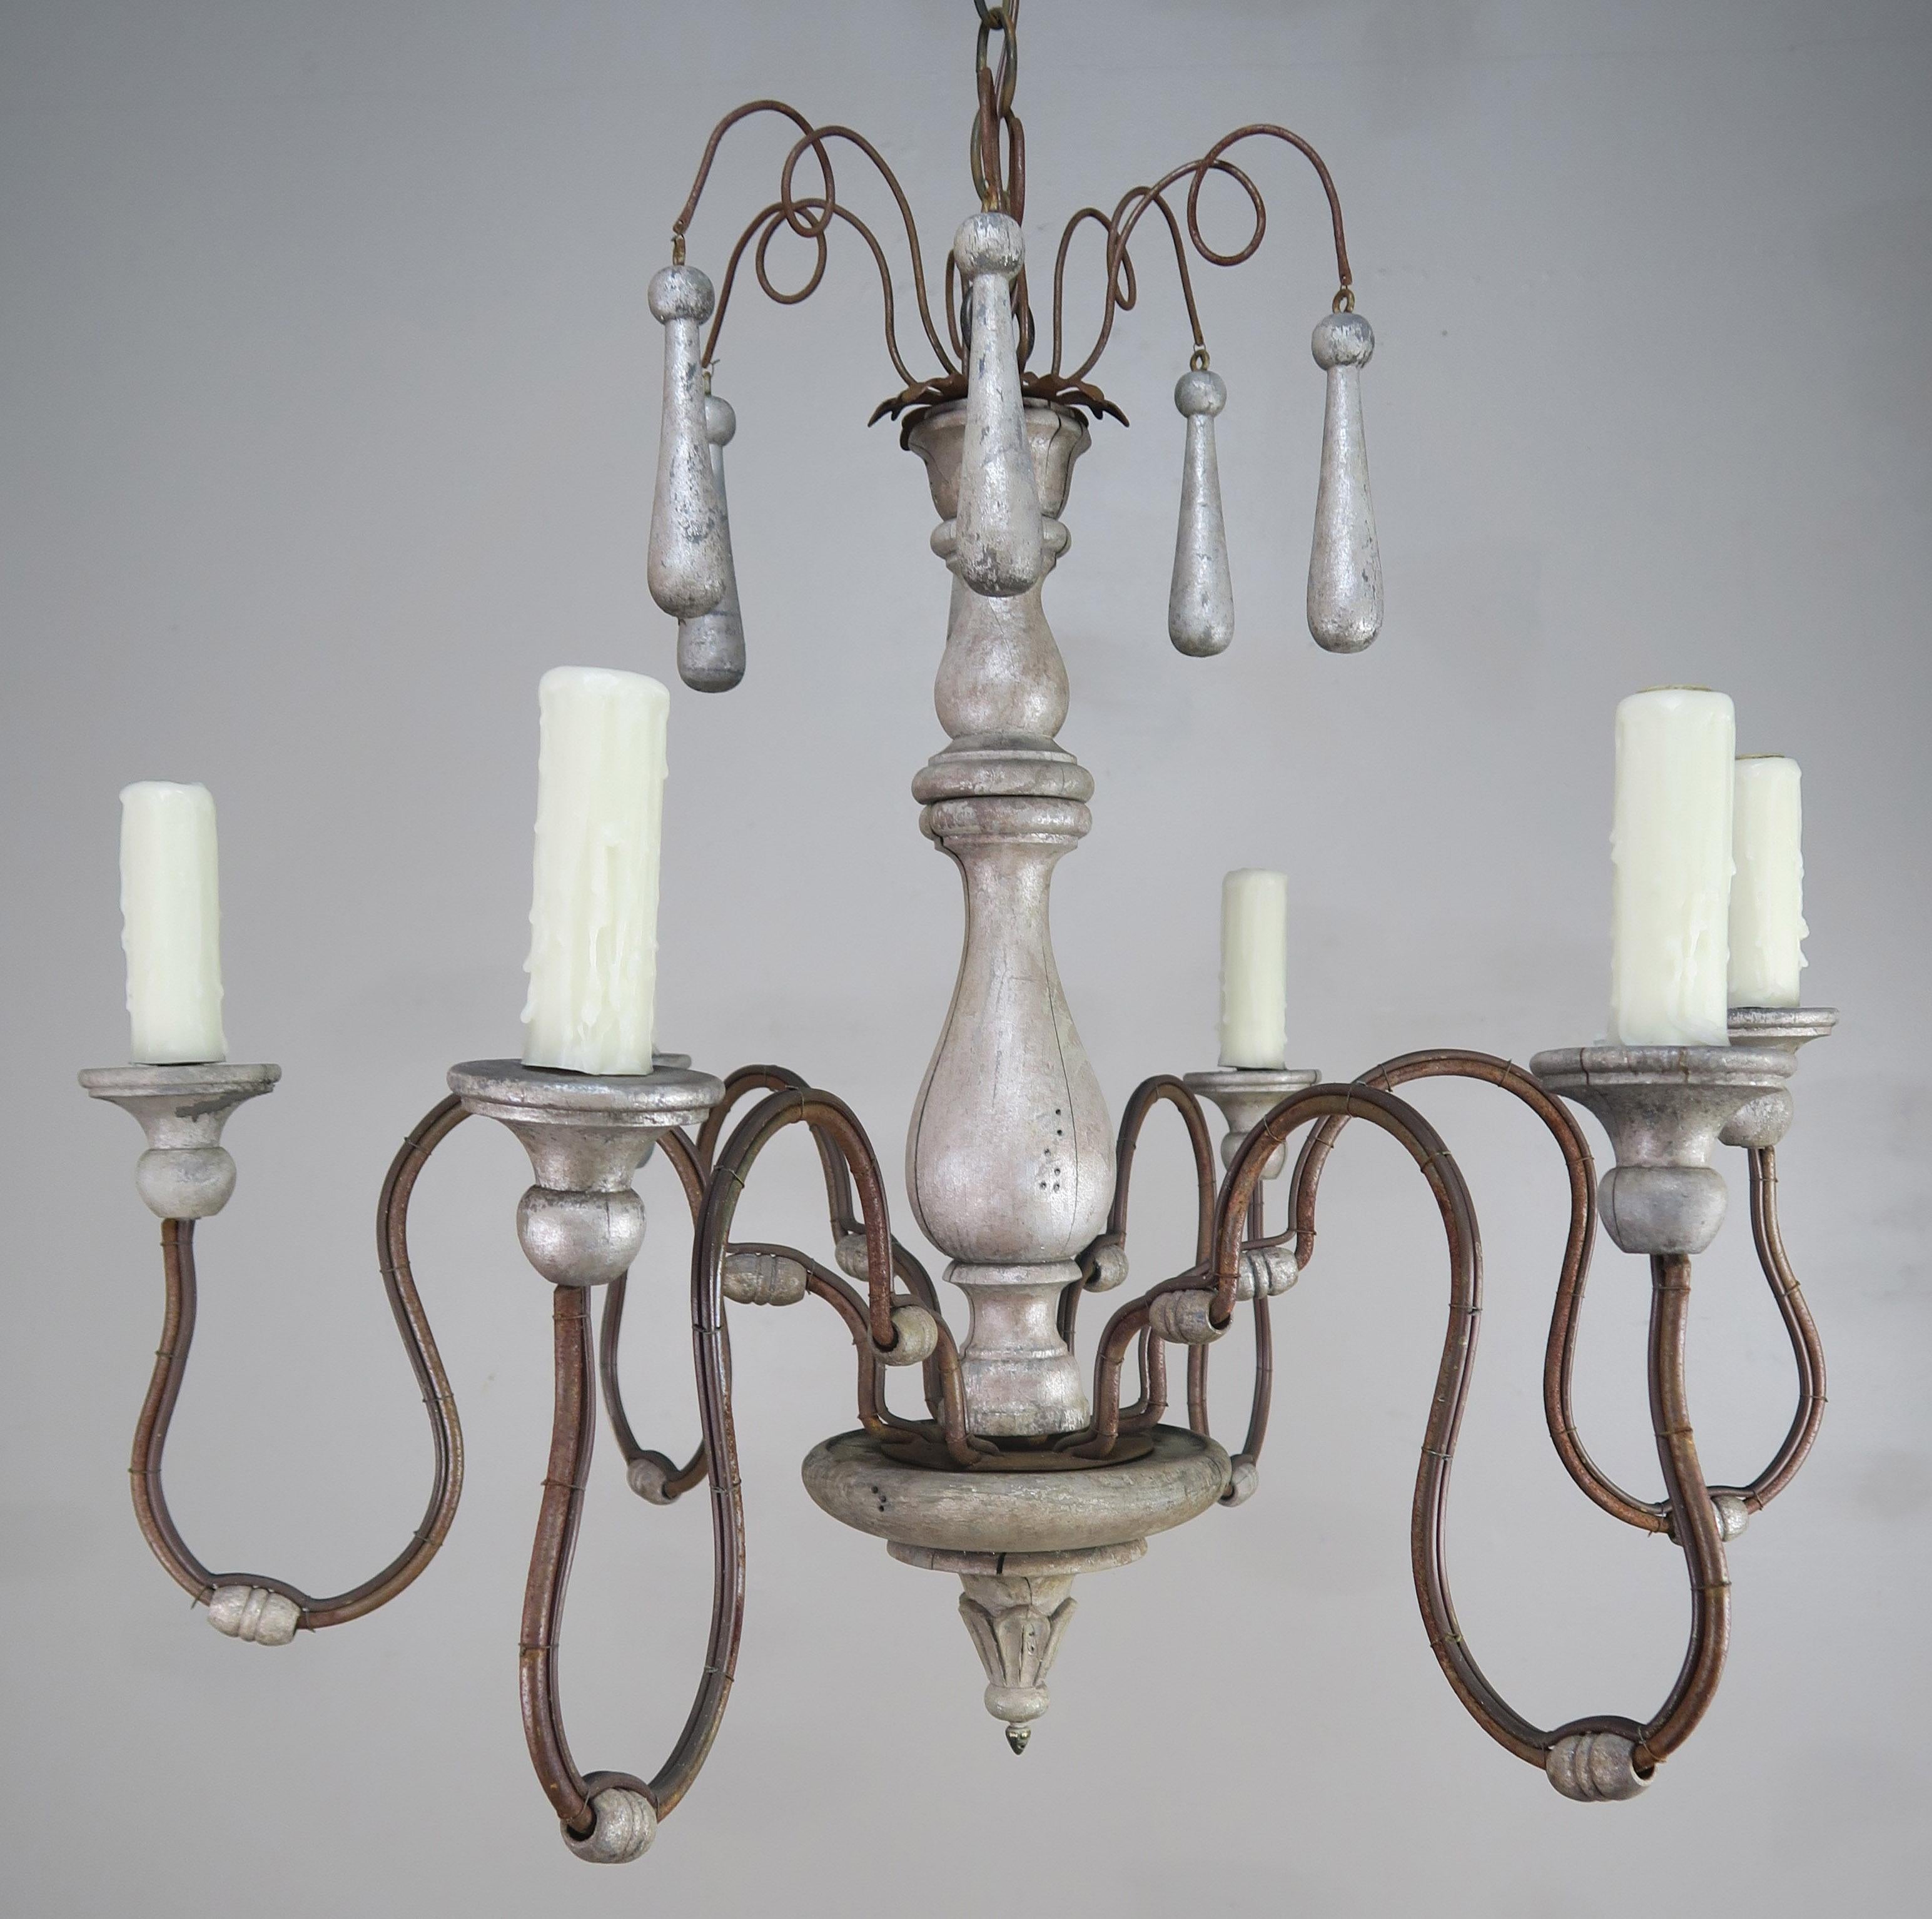 Italian silvered wood and iron six light chandelier with silver wooden drops throughout. The fixture is newly rewired with drip wax candle covers and includes chain and canopy. Ready to install and use.